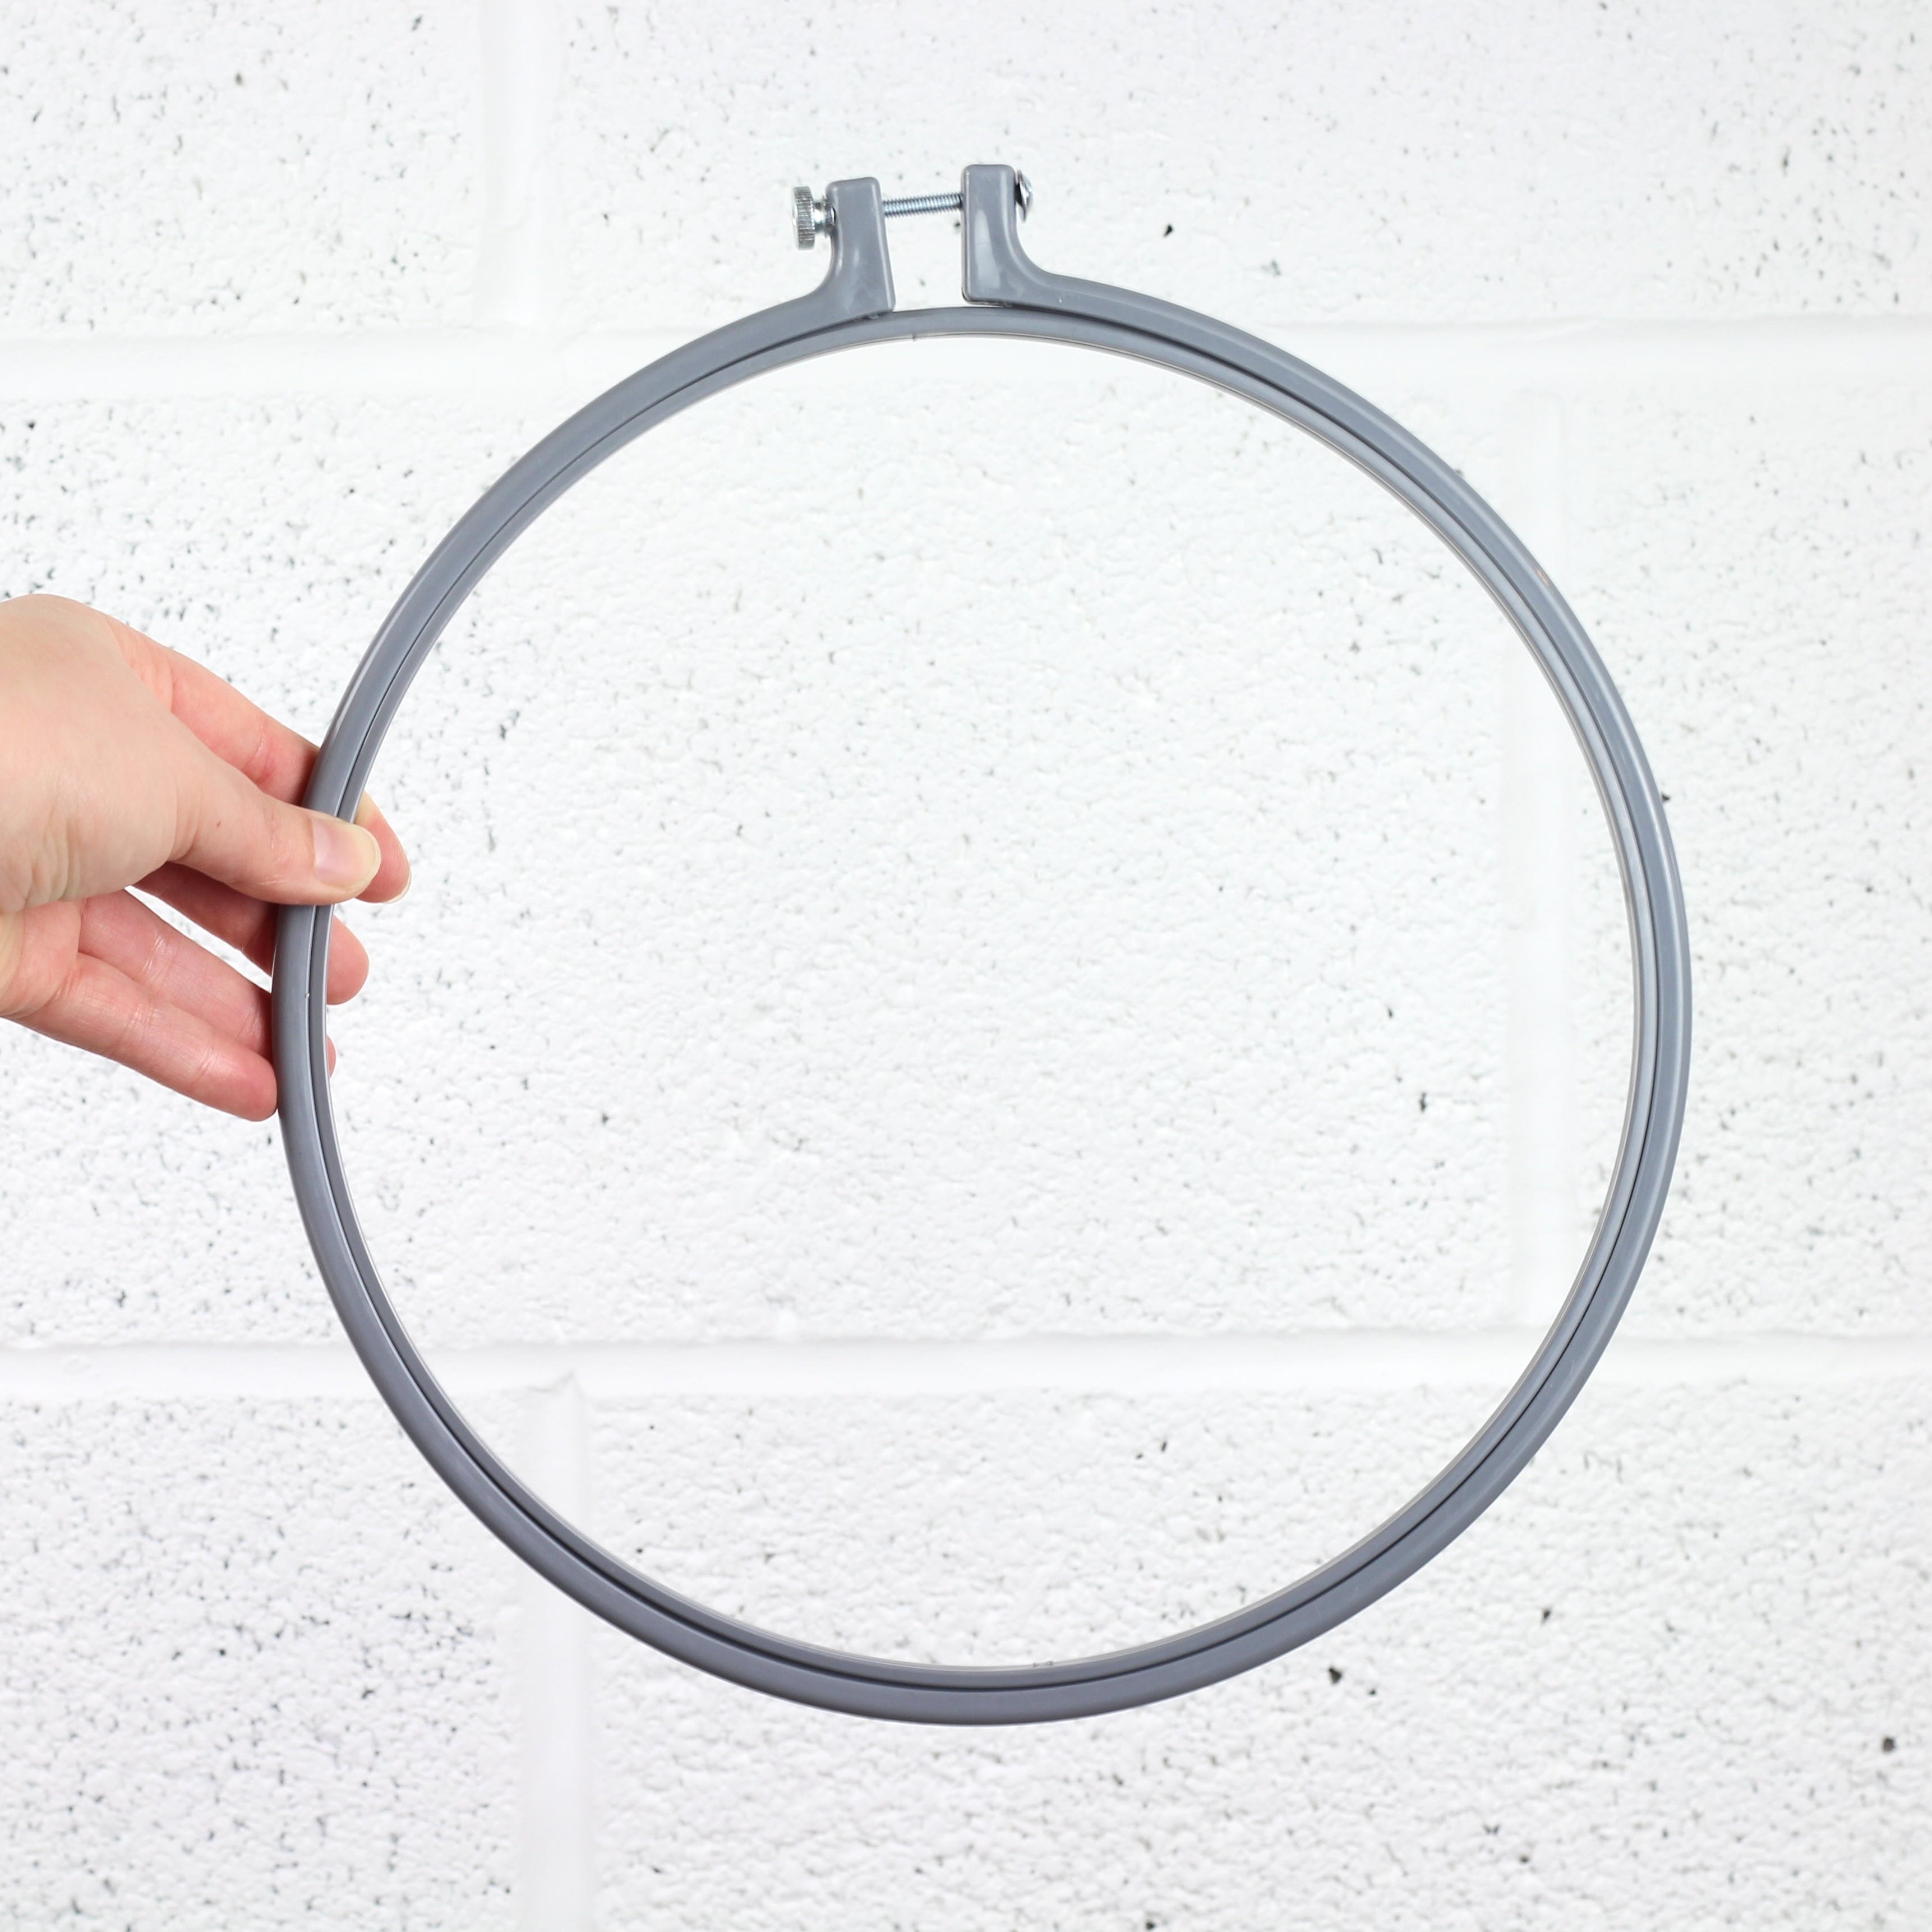 Coloured - Plastic Embroidery Hoop 10" - Grey